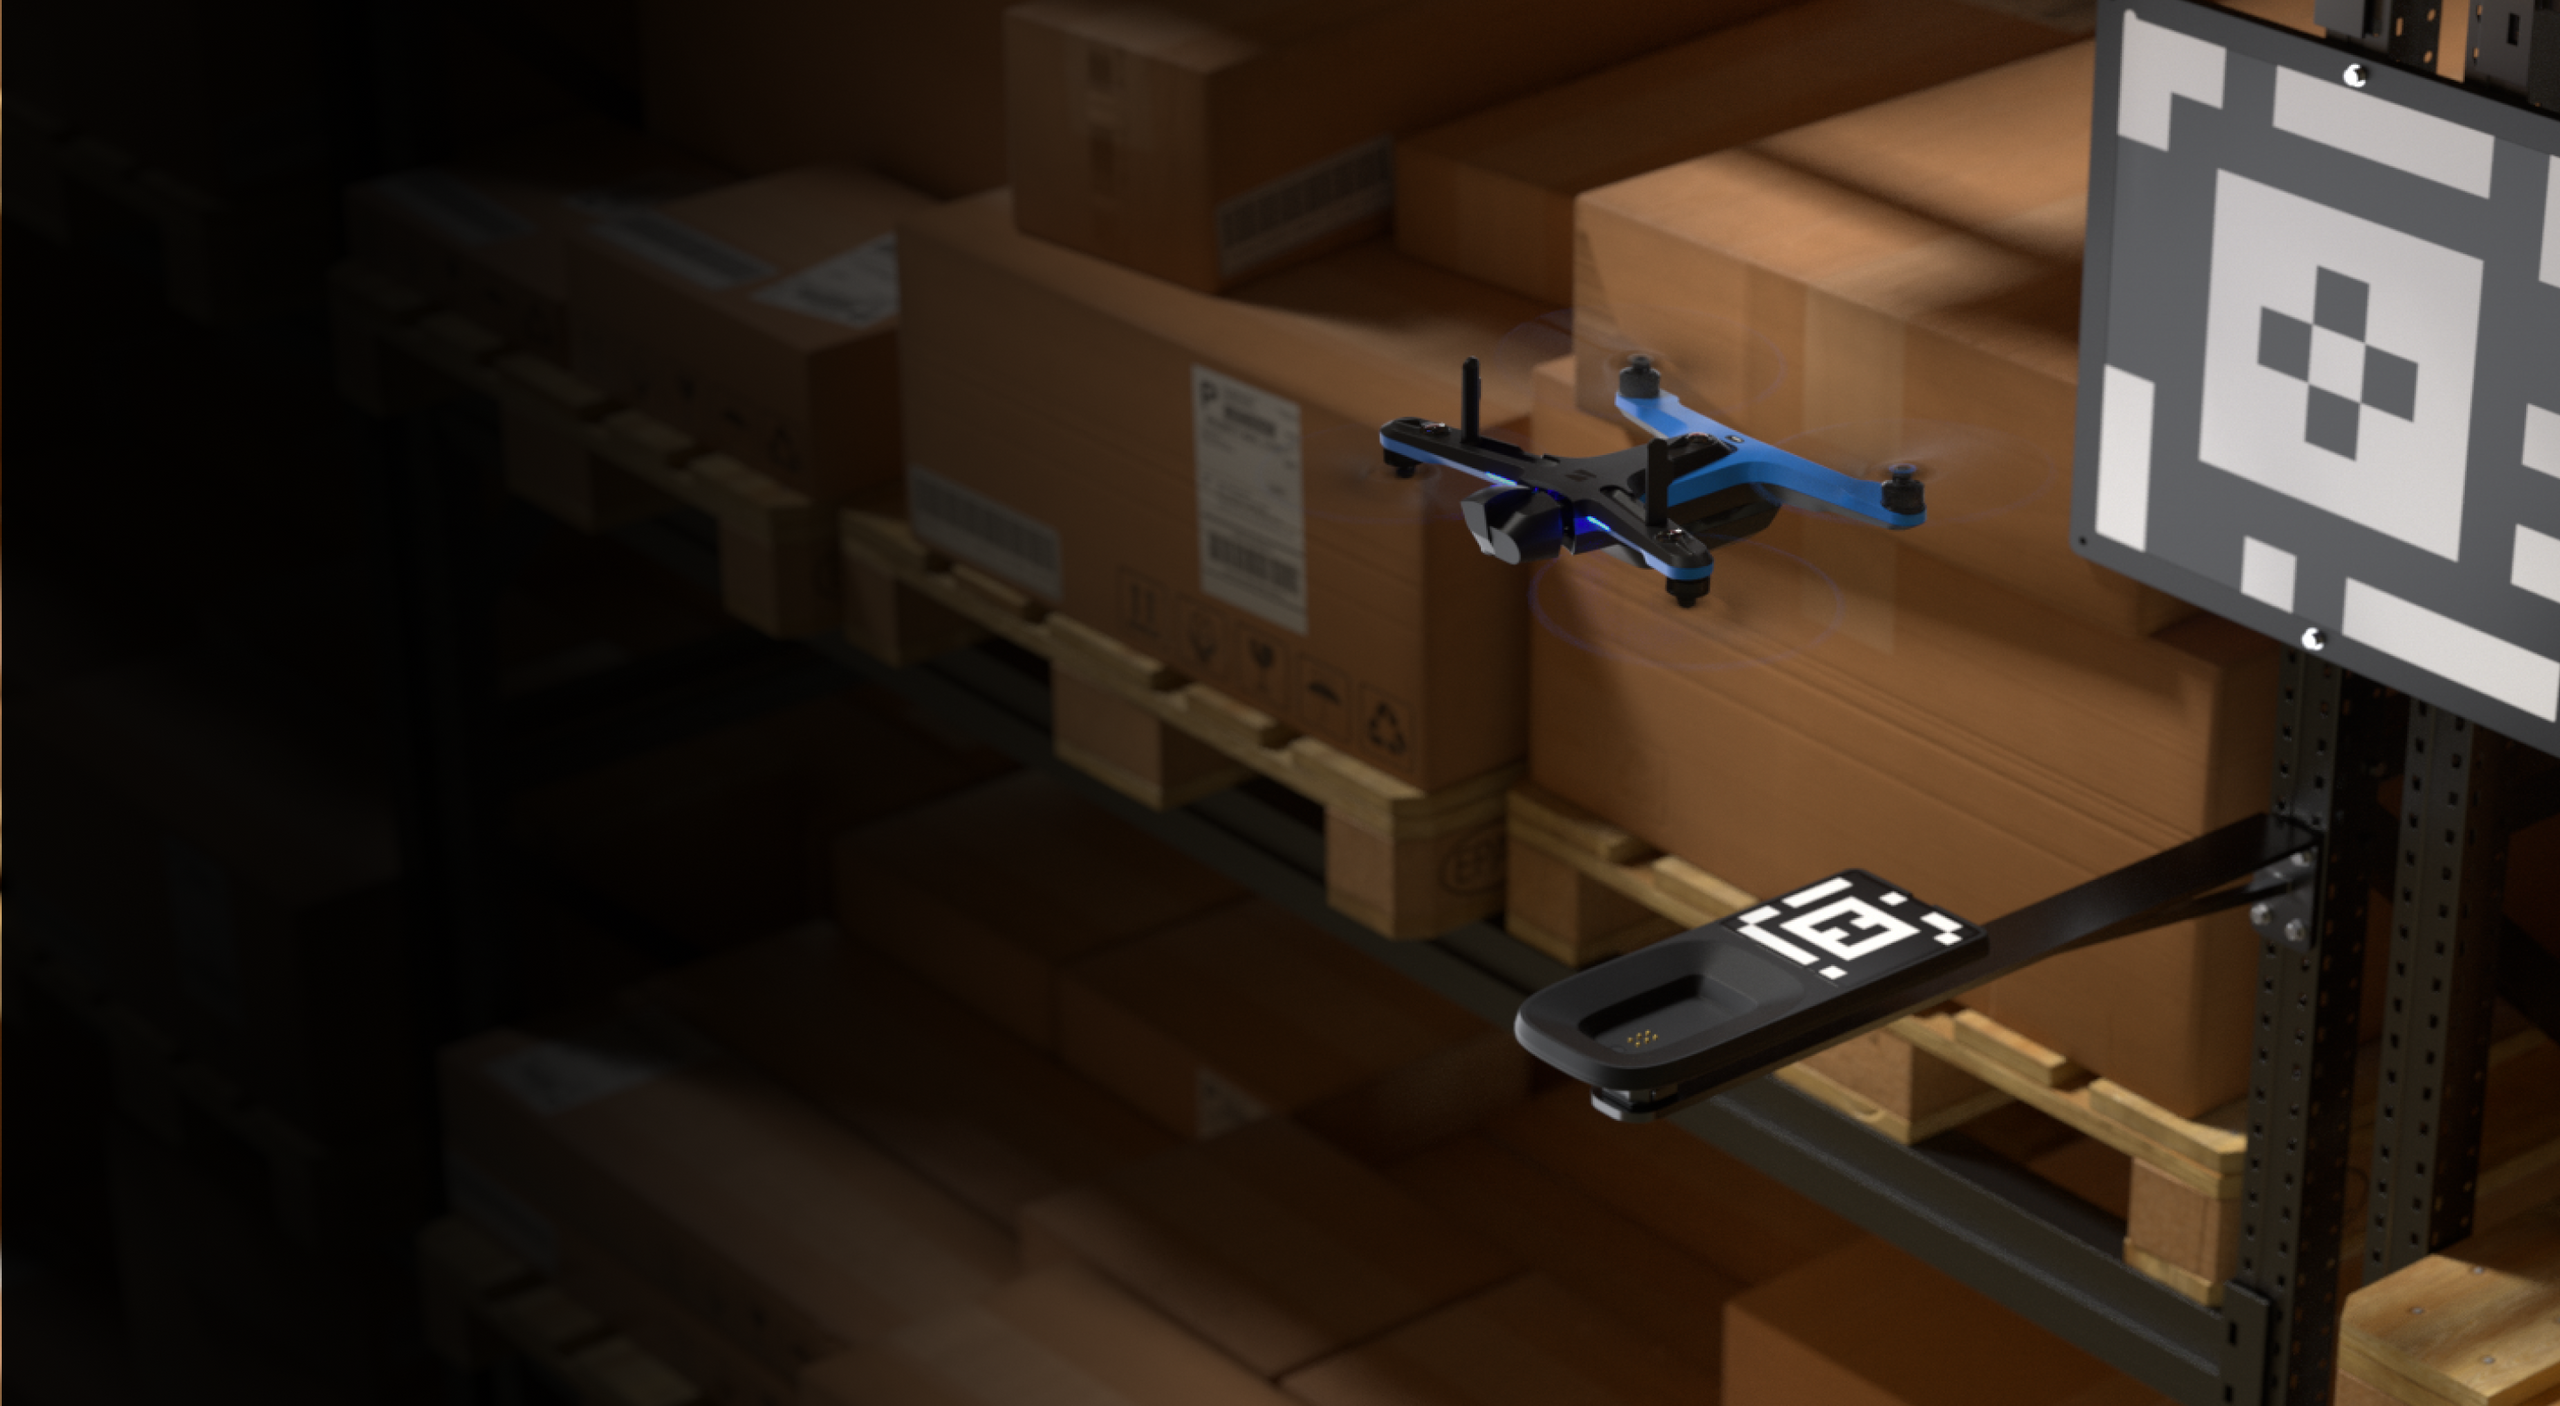 View of Skydio drone leaving dock lite inside warehouse facility